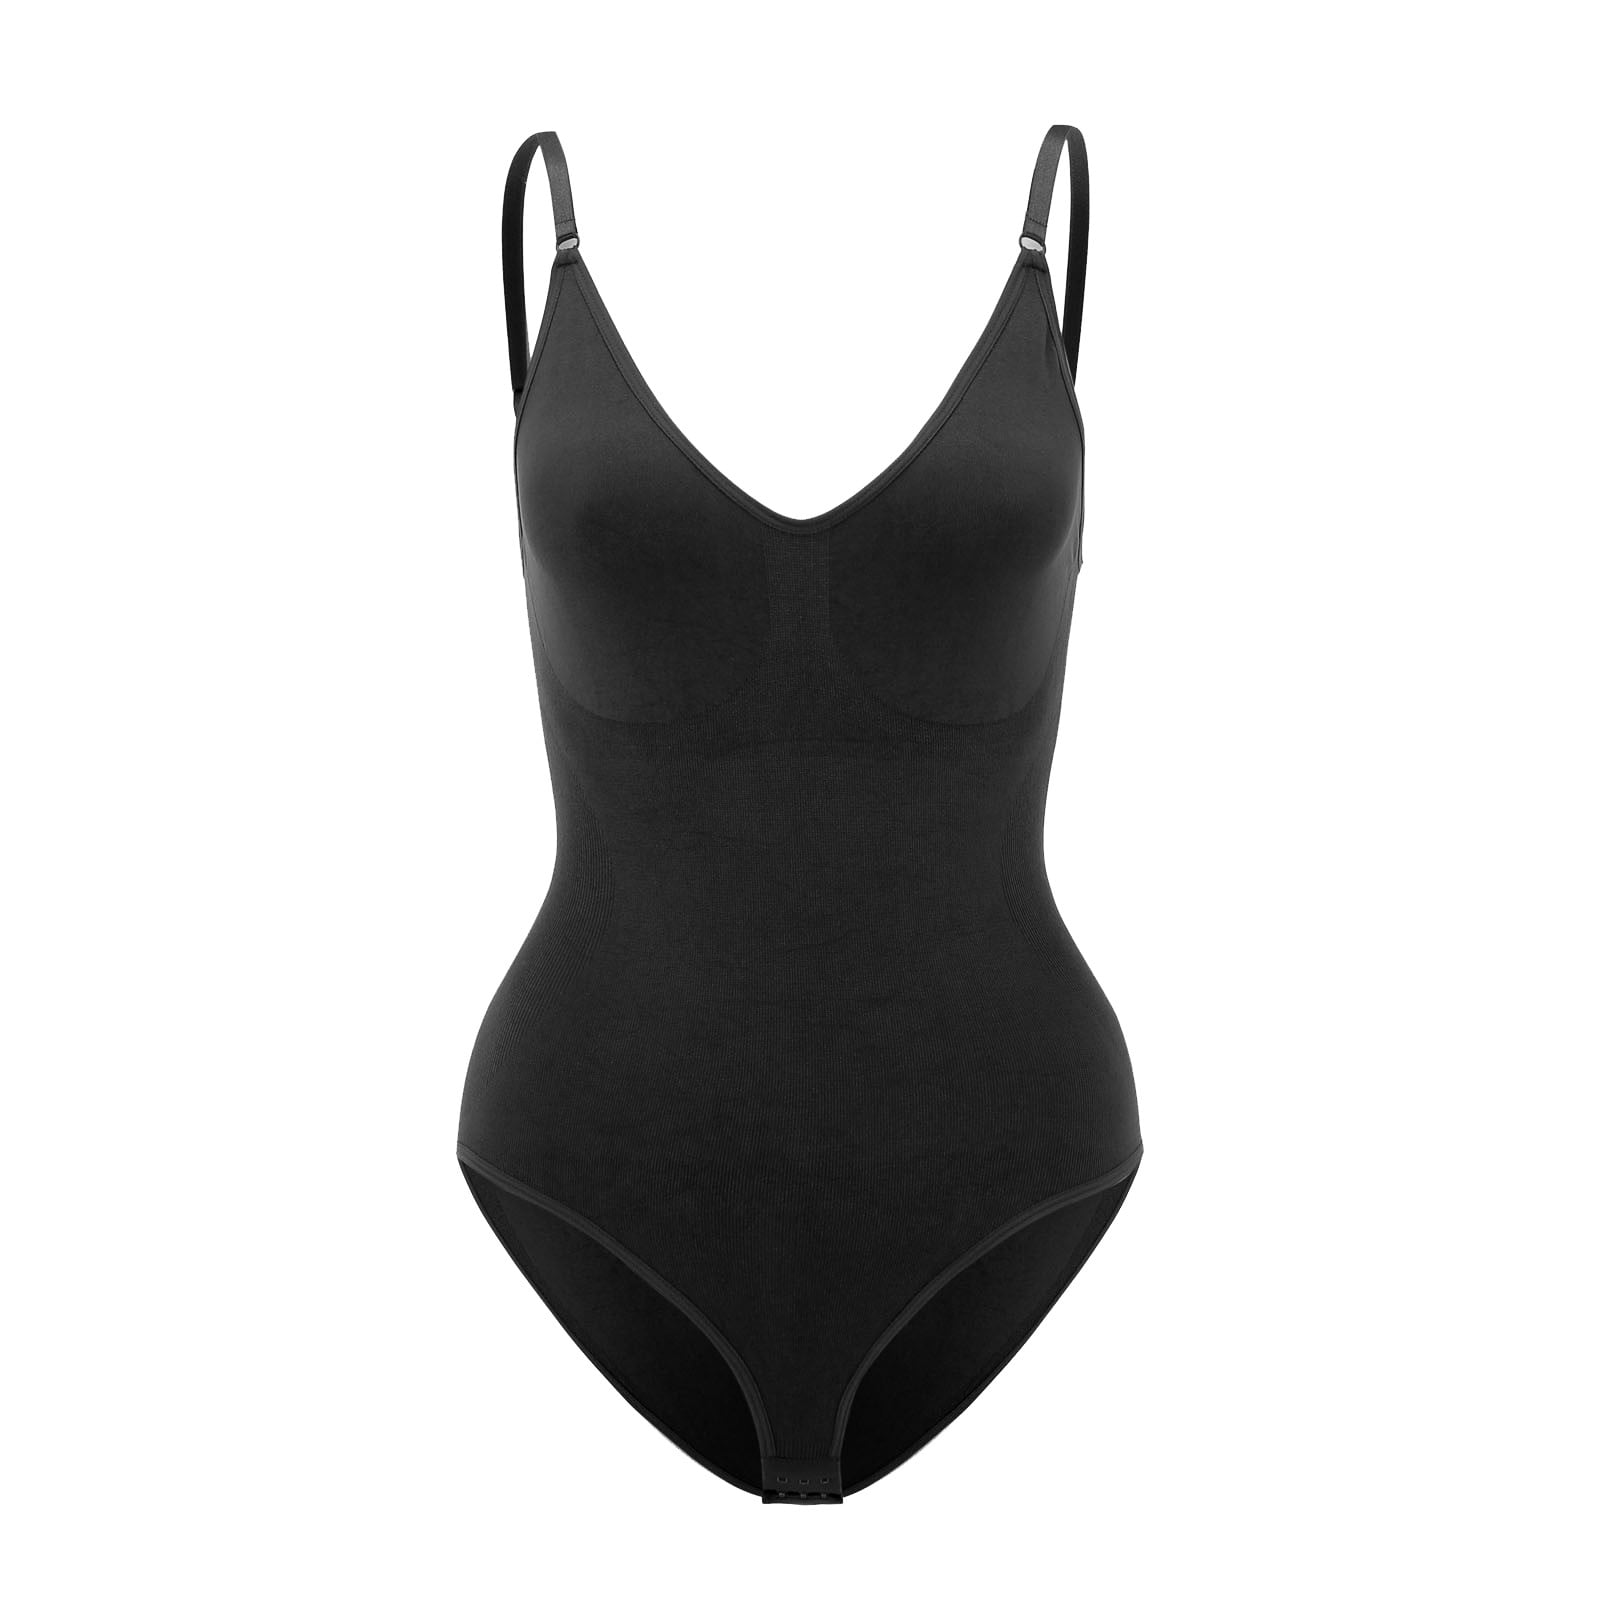 Aayomet Shapewear Body Suits for Women 2 Piece Far Infrared